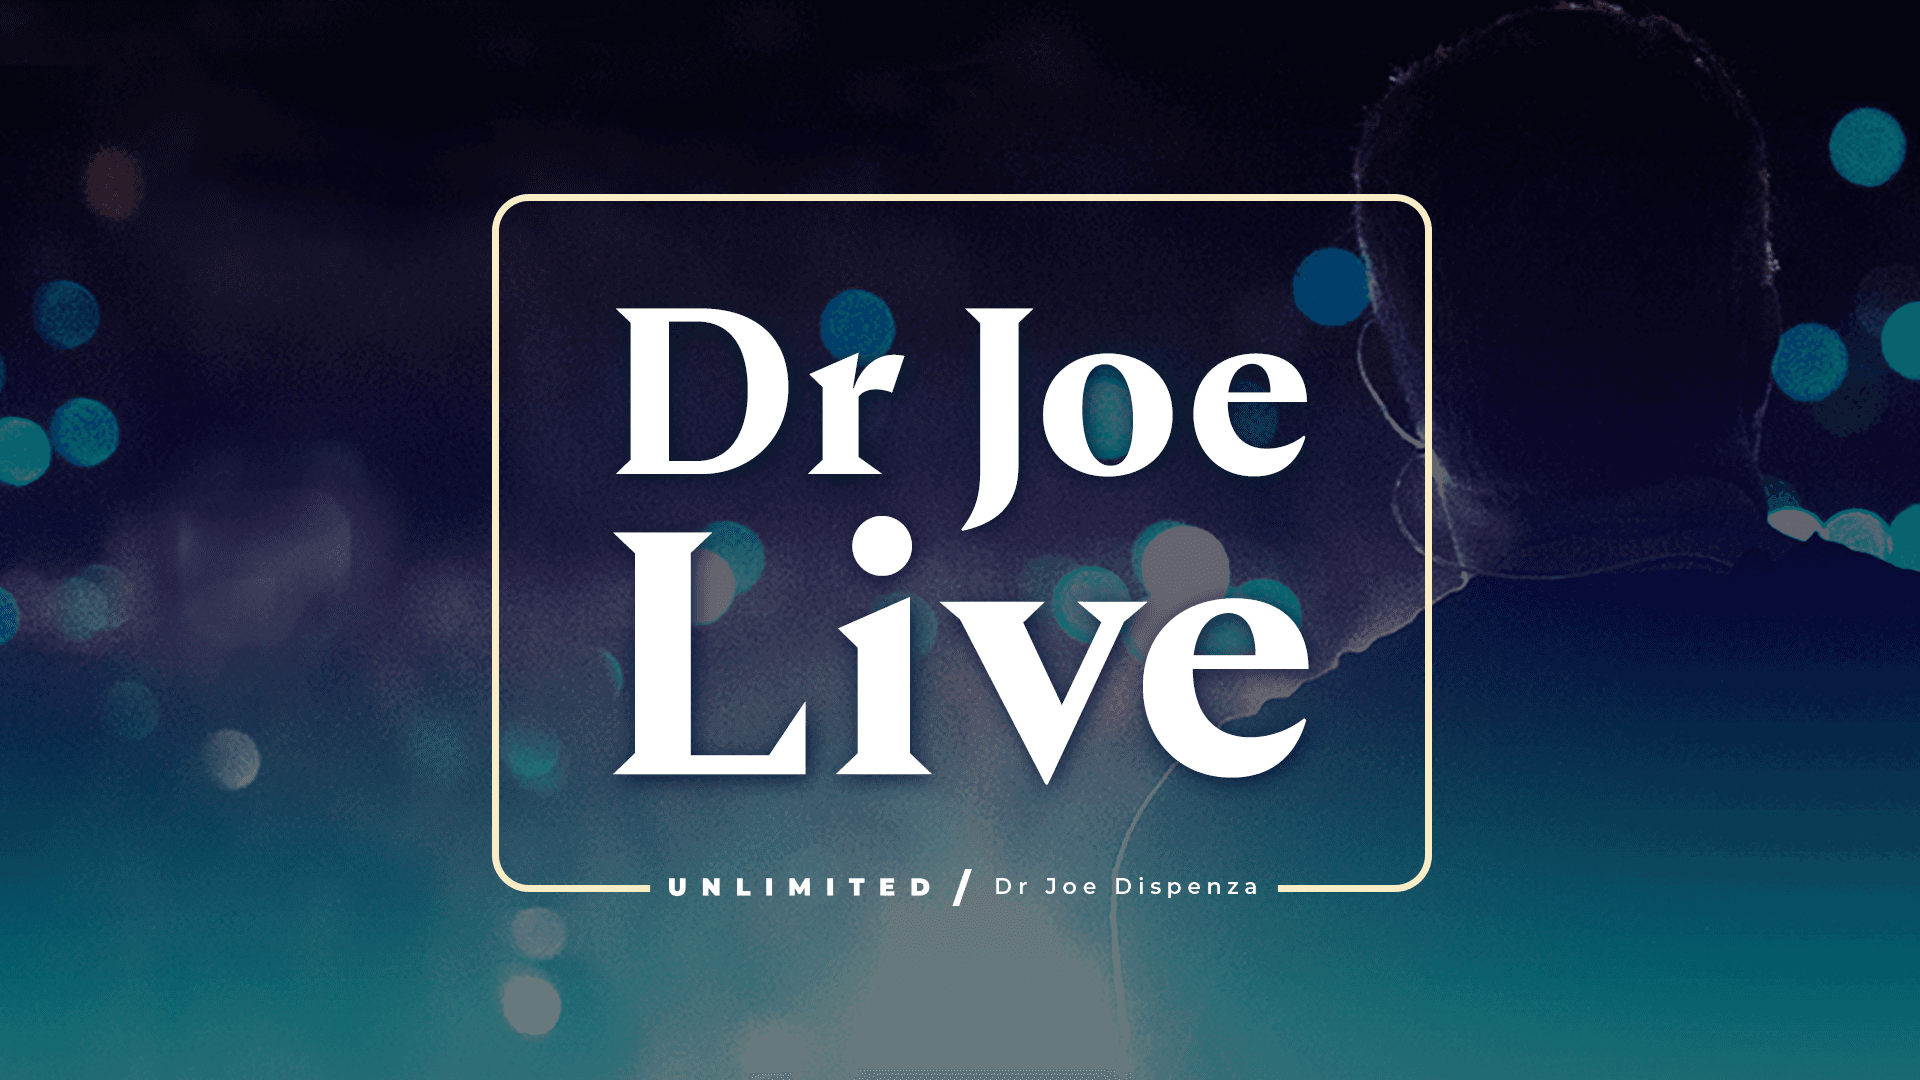 What Is Dr Joe Live?